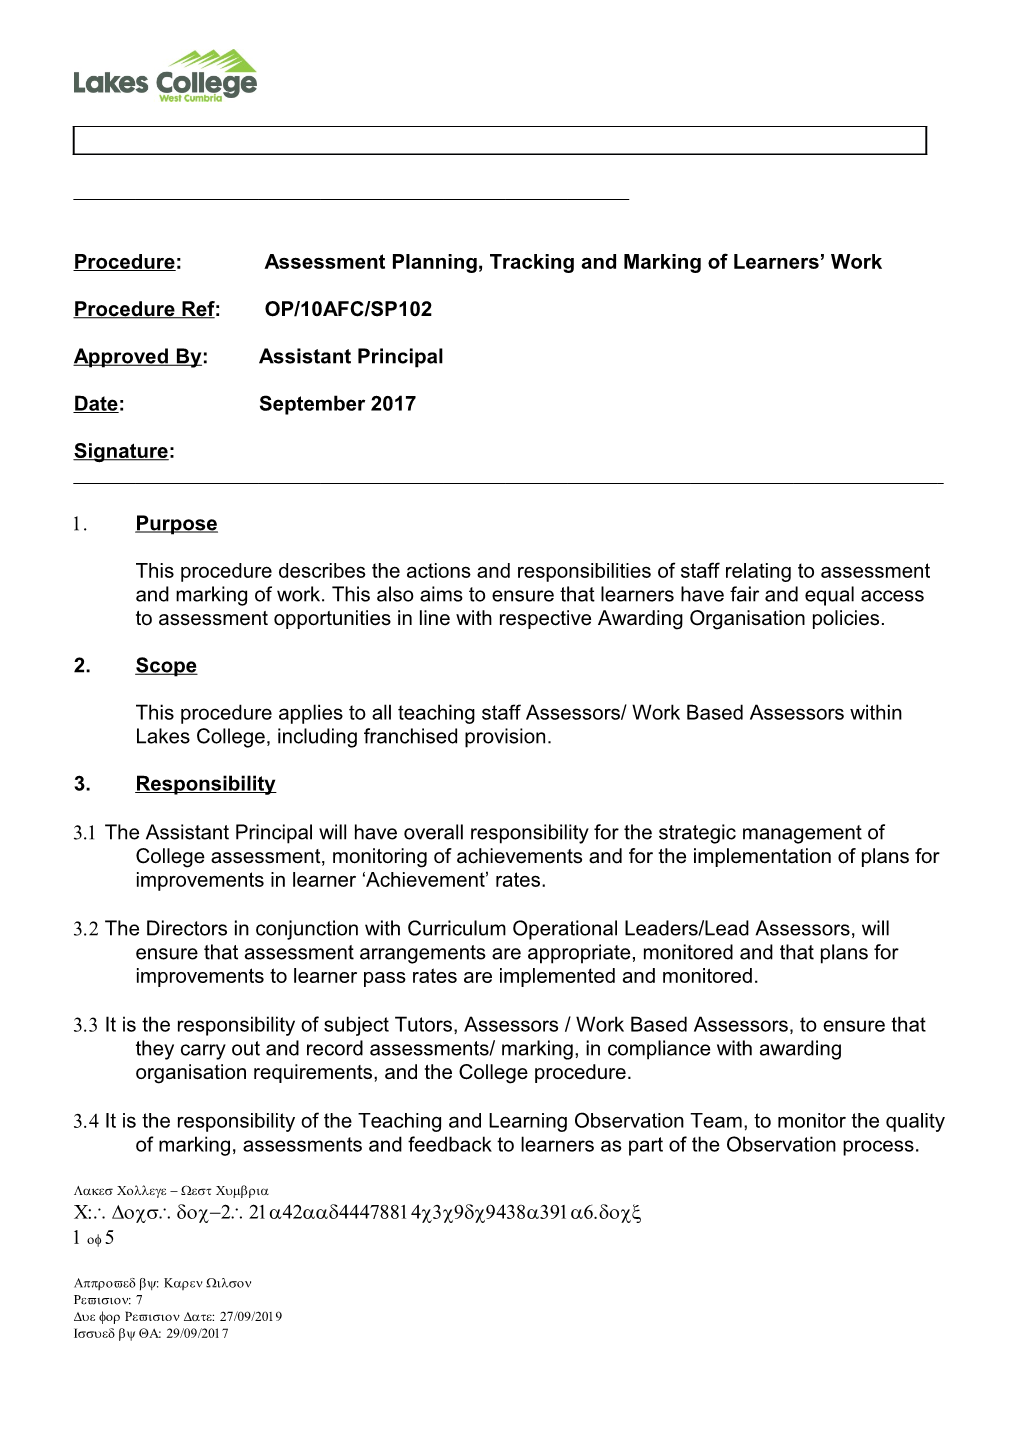 Assessment and Marking of Learners' Work